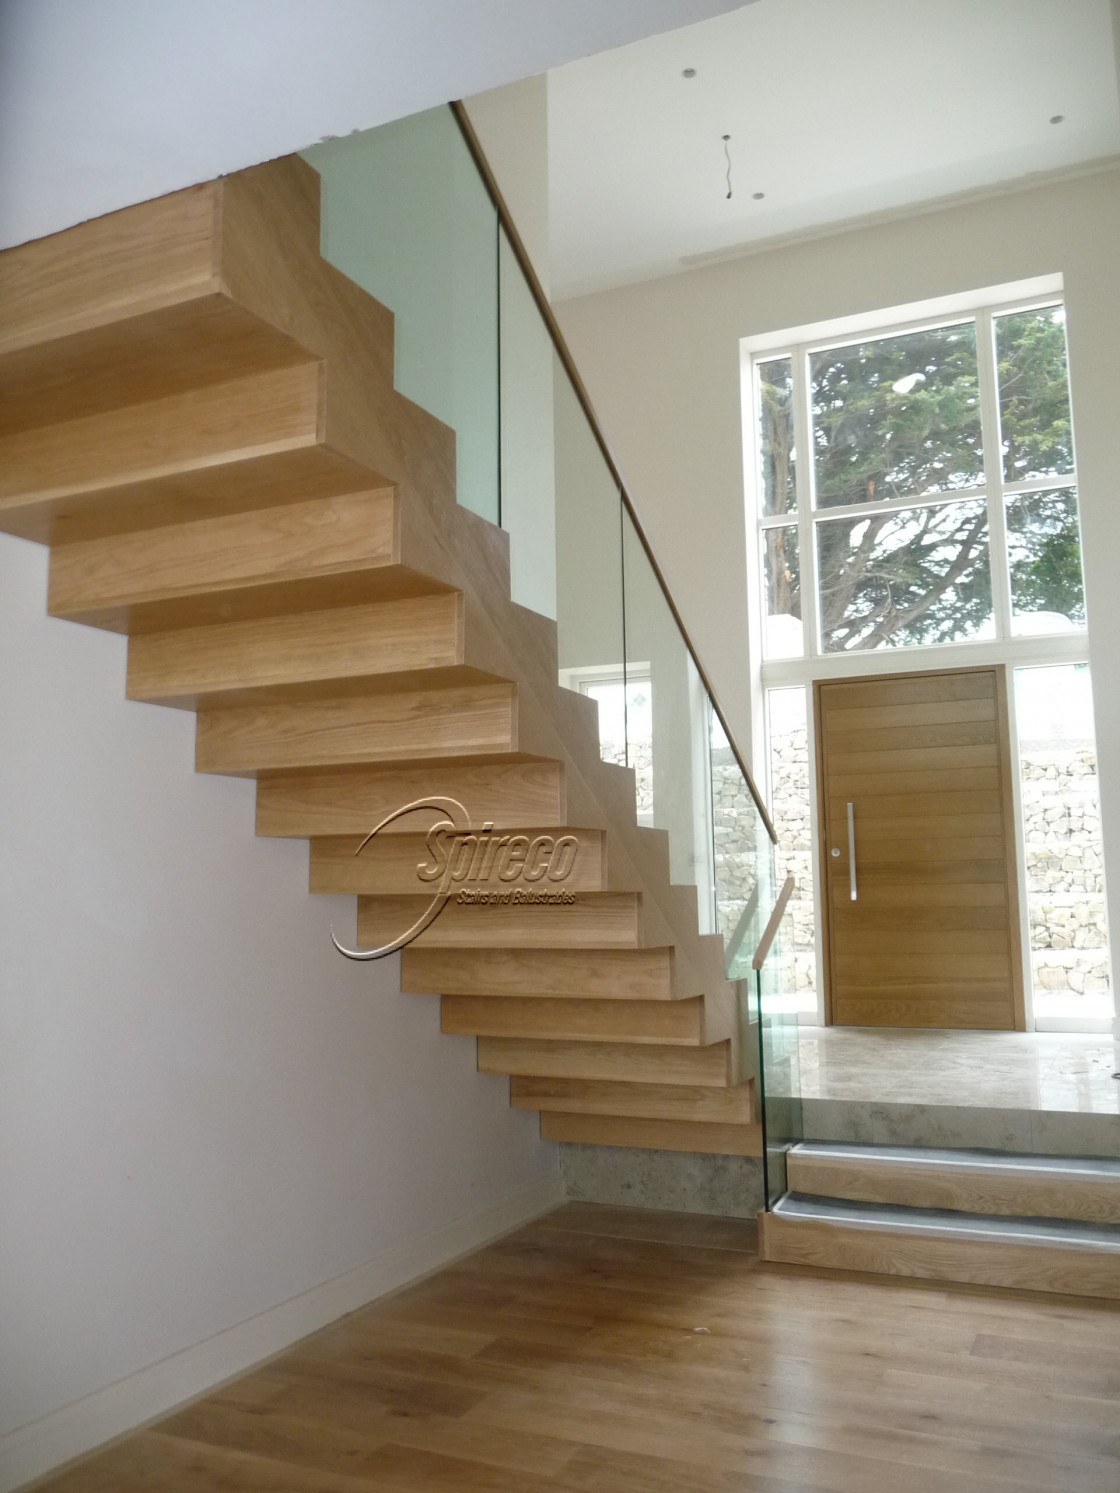 Floating Stairs | Spireco Spiral Stairs